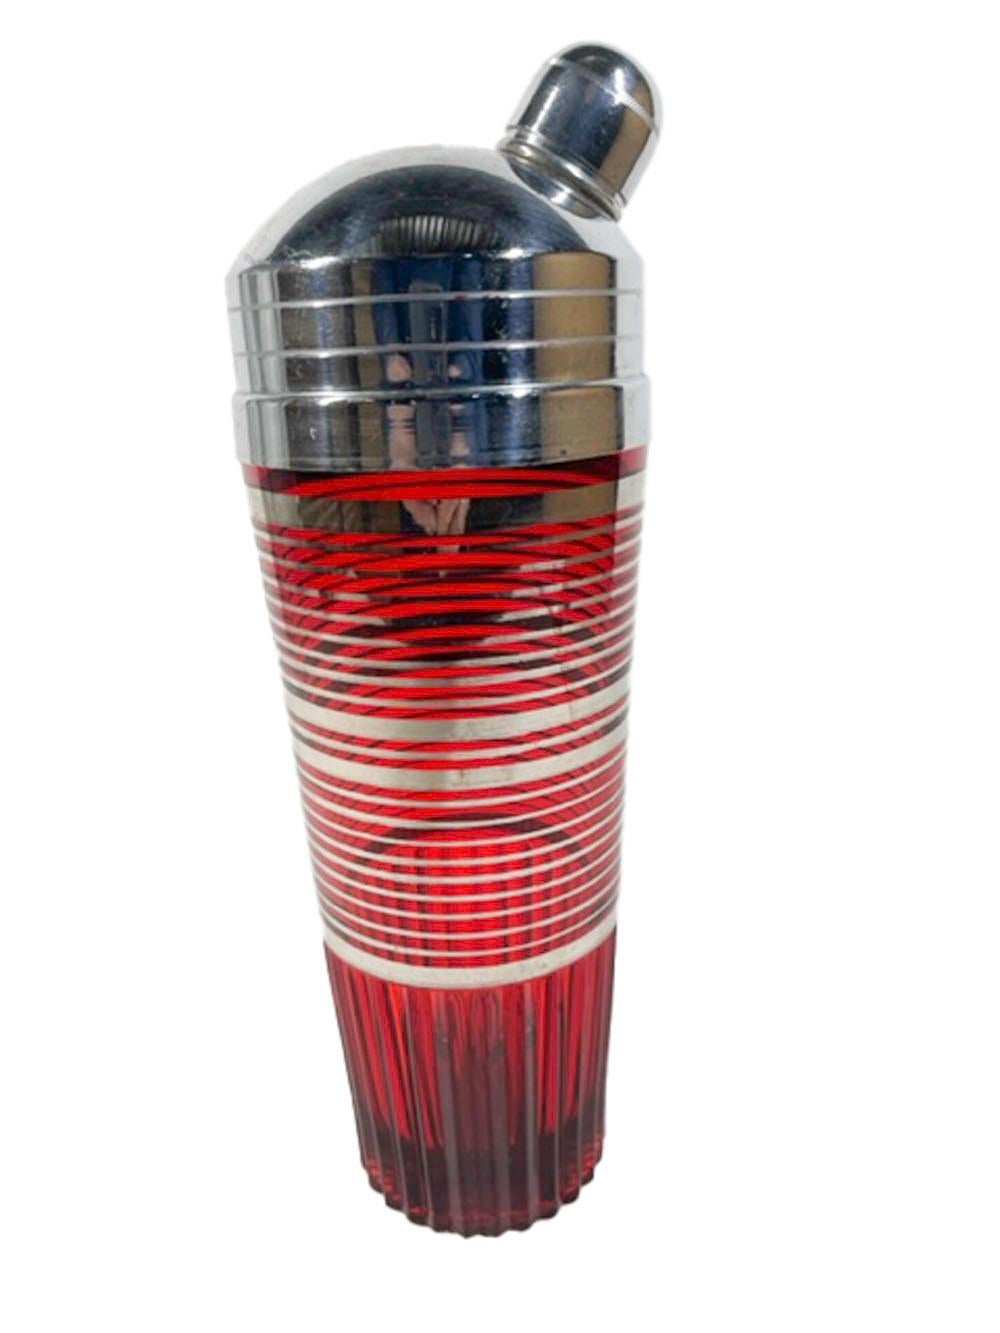 20th Century Art Deco, Paden City Glass Cocktail Shaker in the Glades Pattern, Ruby W/Silver